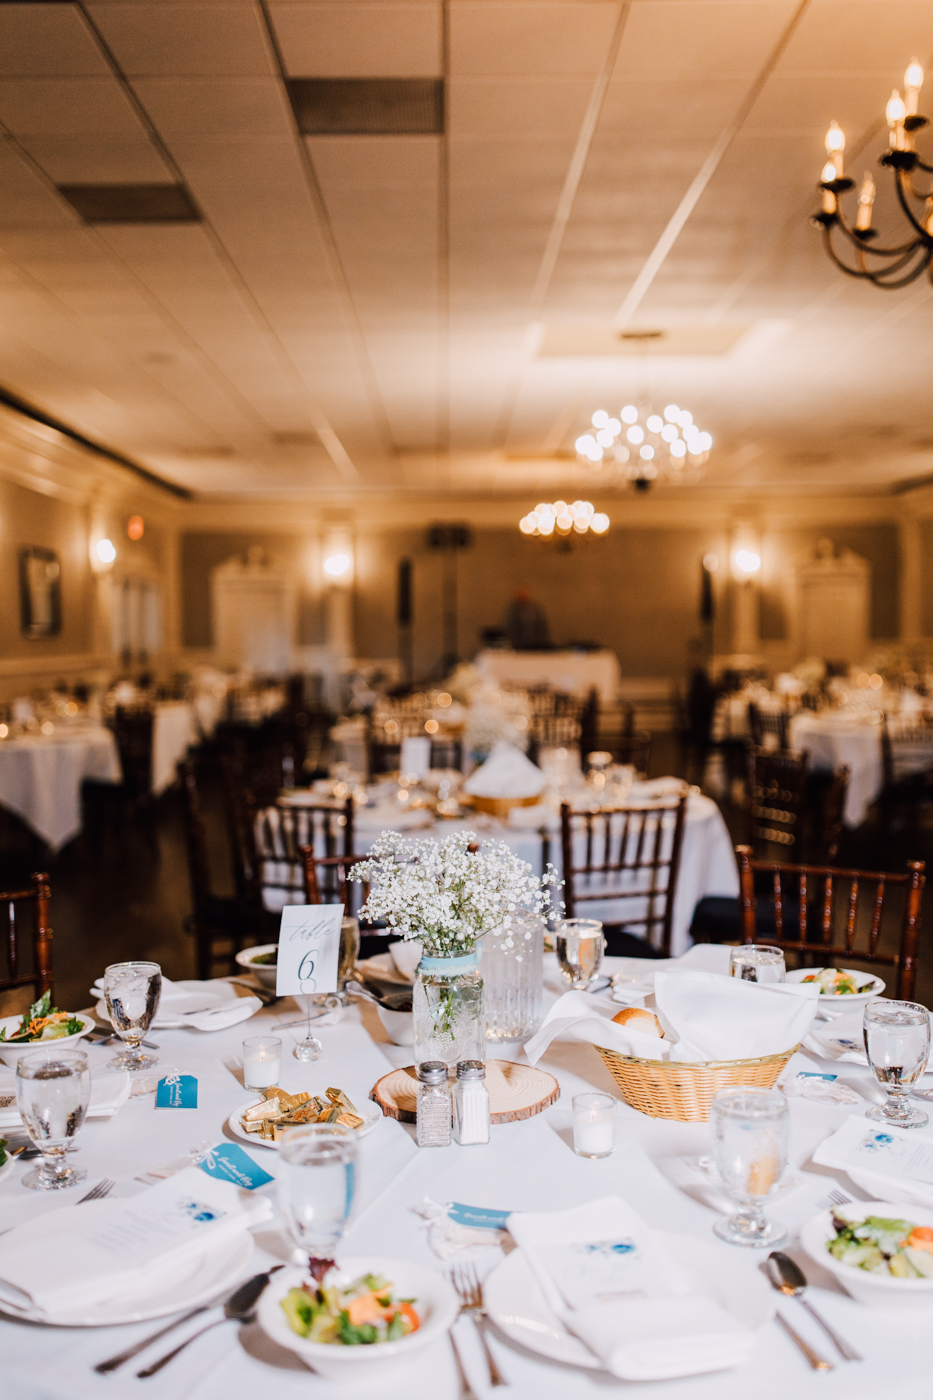  Simple charming wedding reception decor at the Springside Inn in Auburn NY with ball jars of baby’s breath as centerpieces 